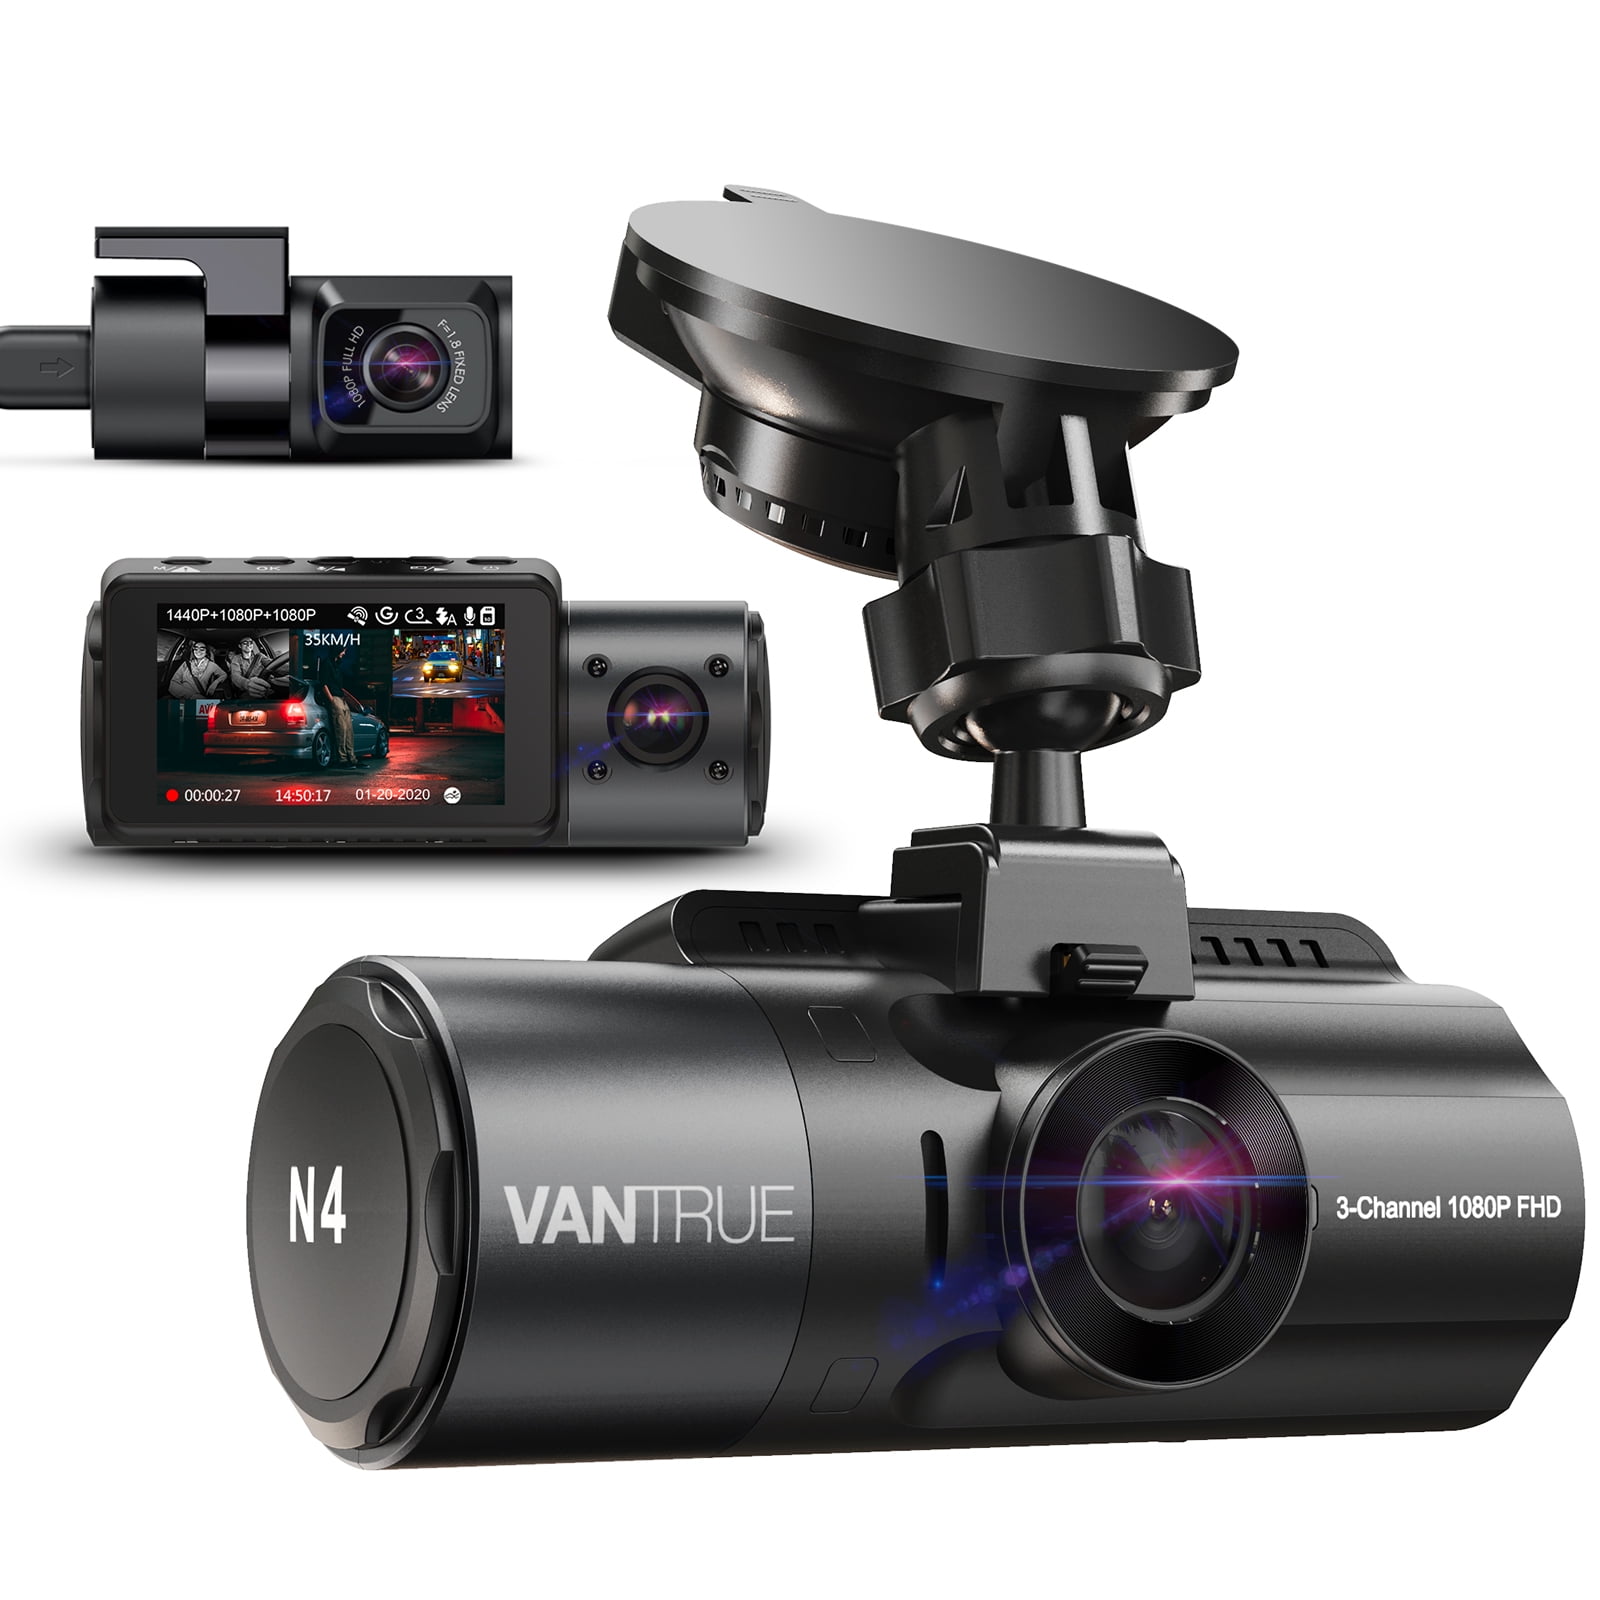 Dropship 3 Channel Dash Cam For Car With 1080 + 1080 + 480p Three